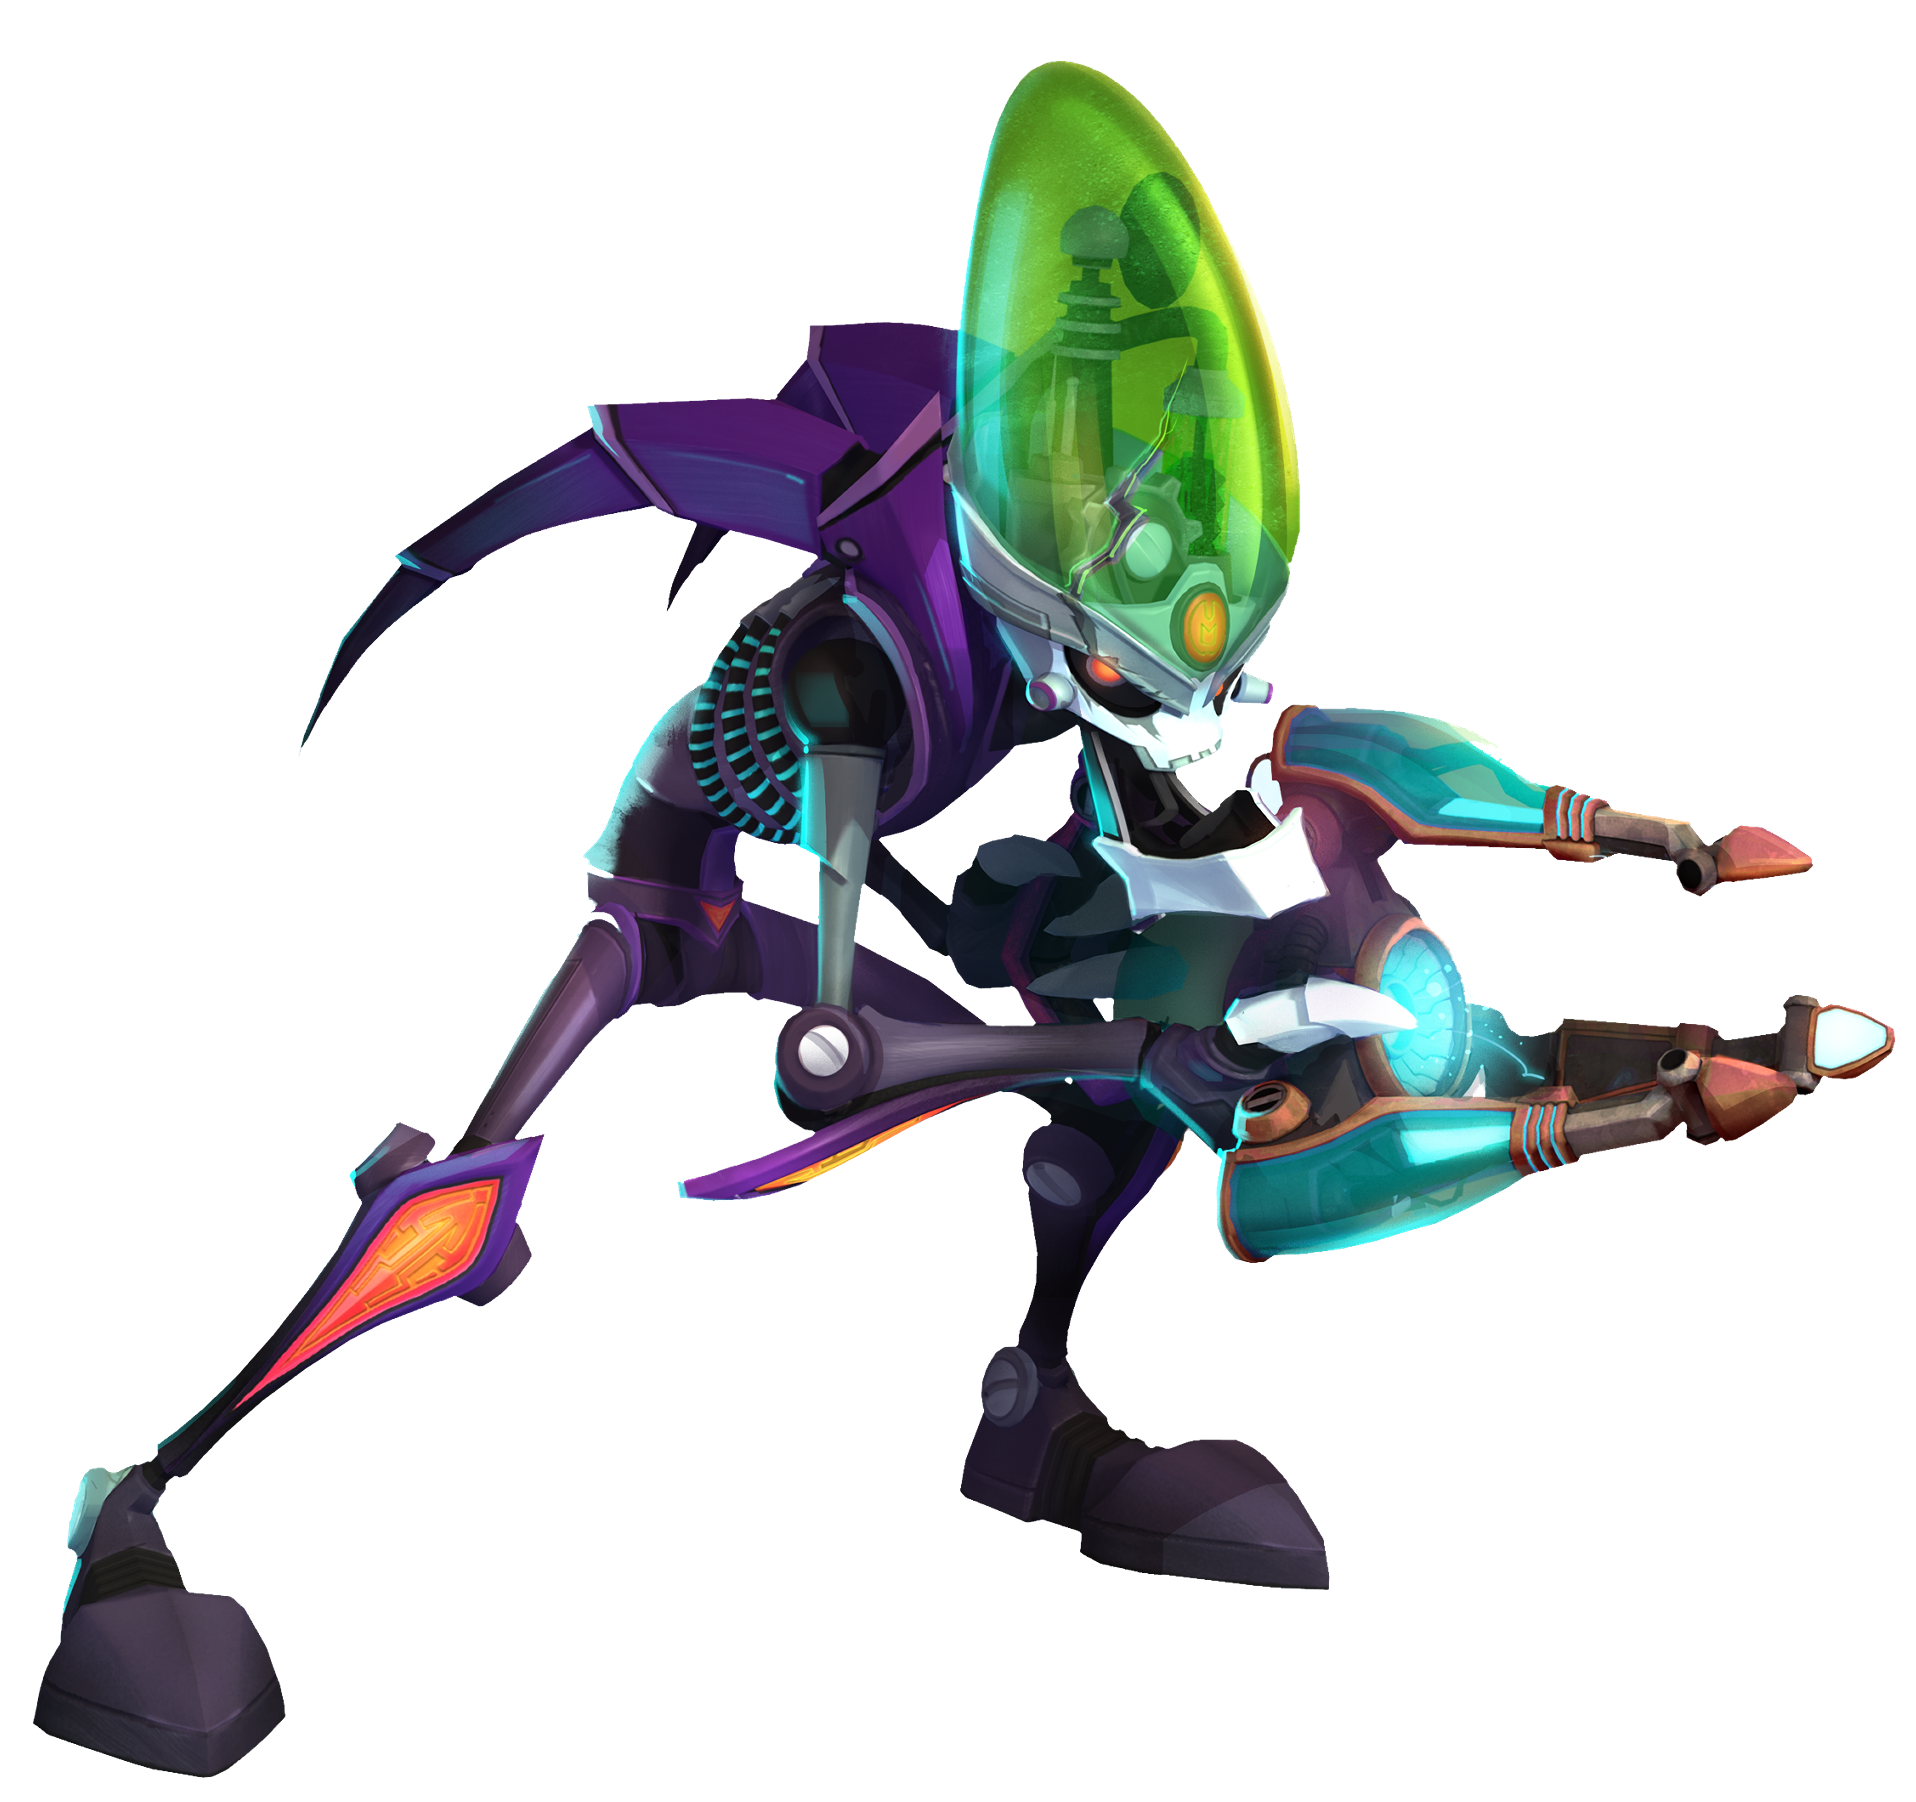 repopulate the universe with robots ratchet and clank wiki